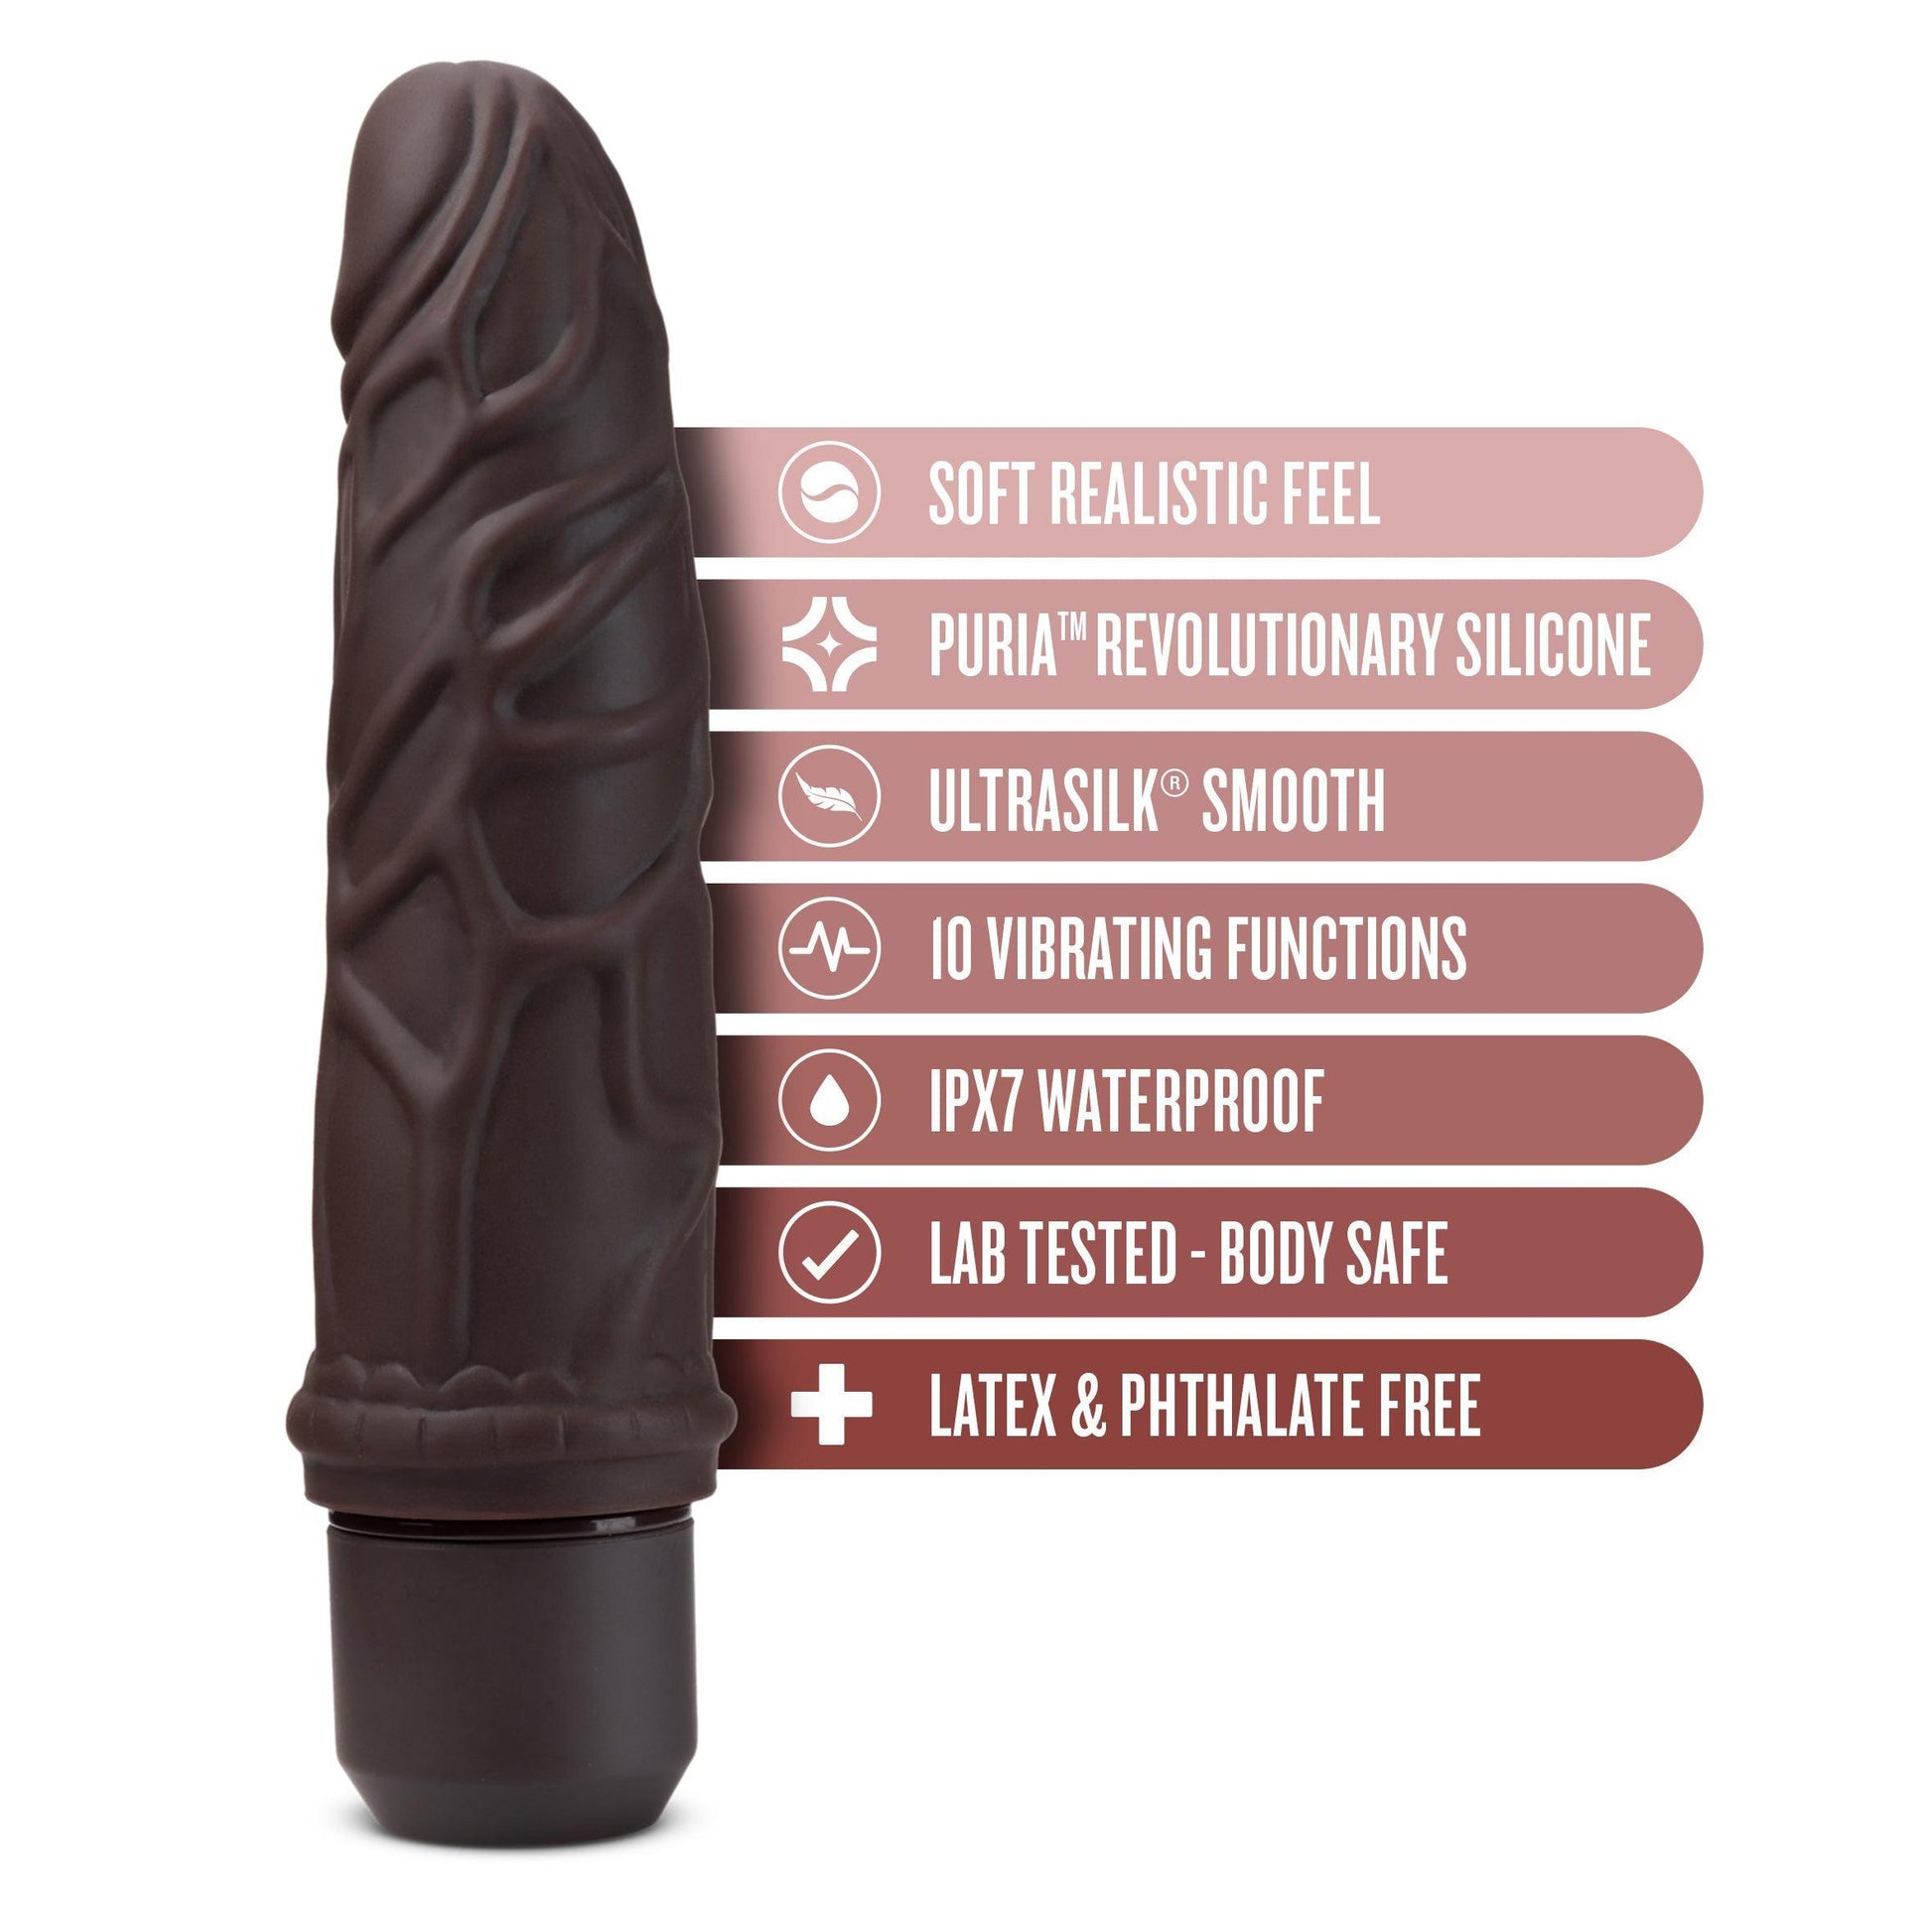 Dr. Skin Silicone - Dr. Robert - 7 Inch Vibrating  Dildo - Brown